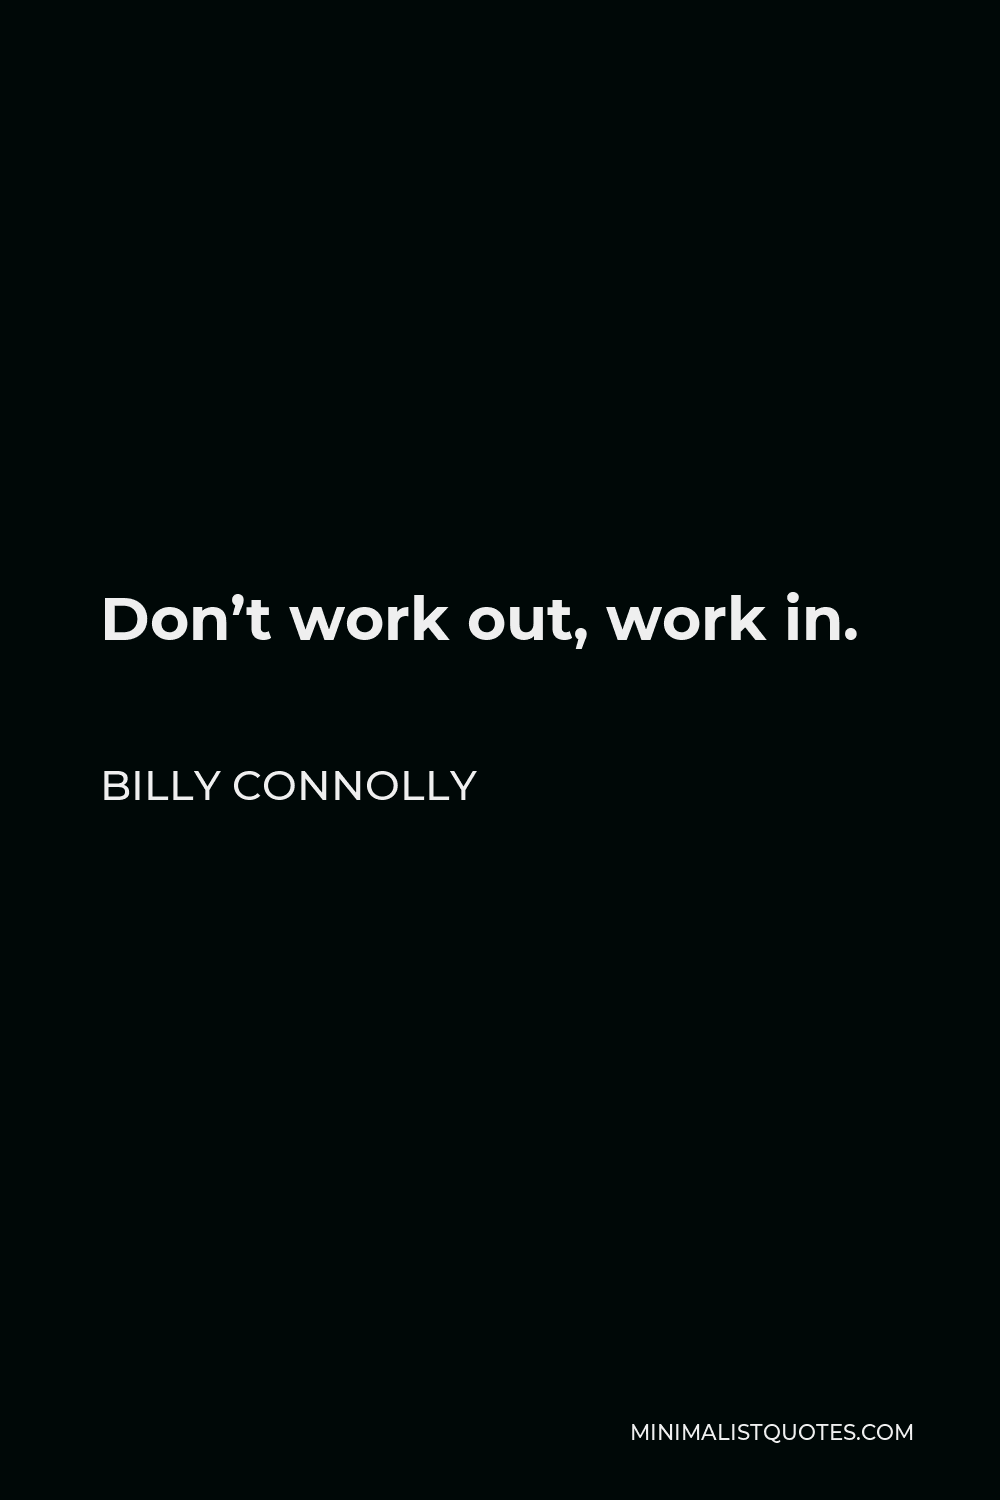 Billy Connolly Quote - Don’t work out, work in.